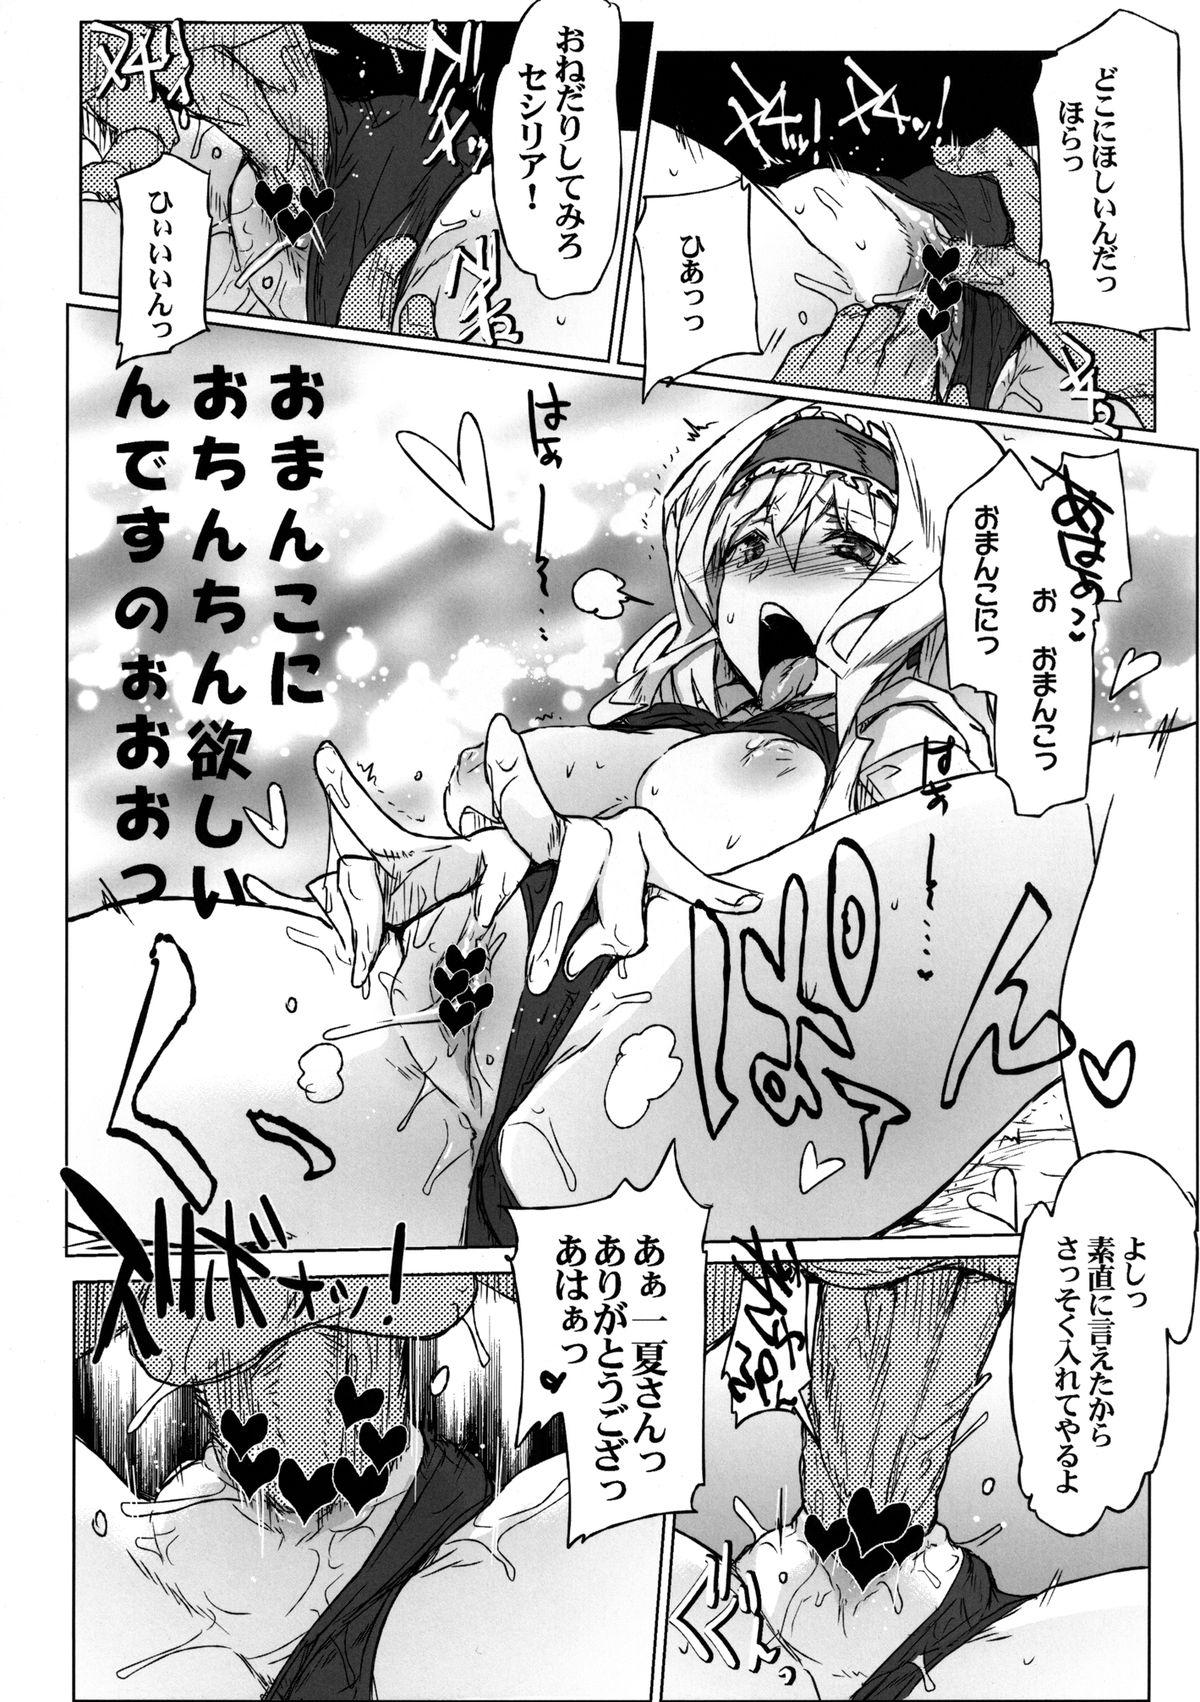 Women IS Girls 2 - Infinite stratos Gay College - Page 12